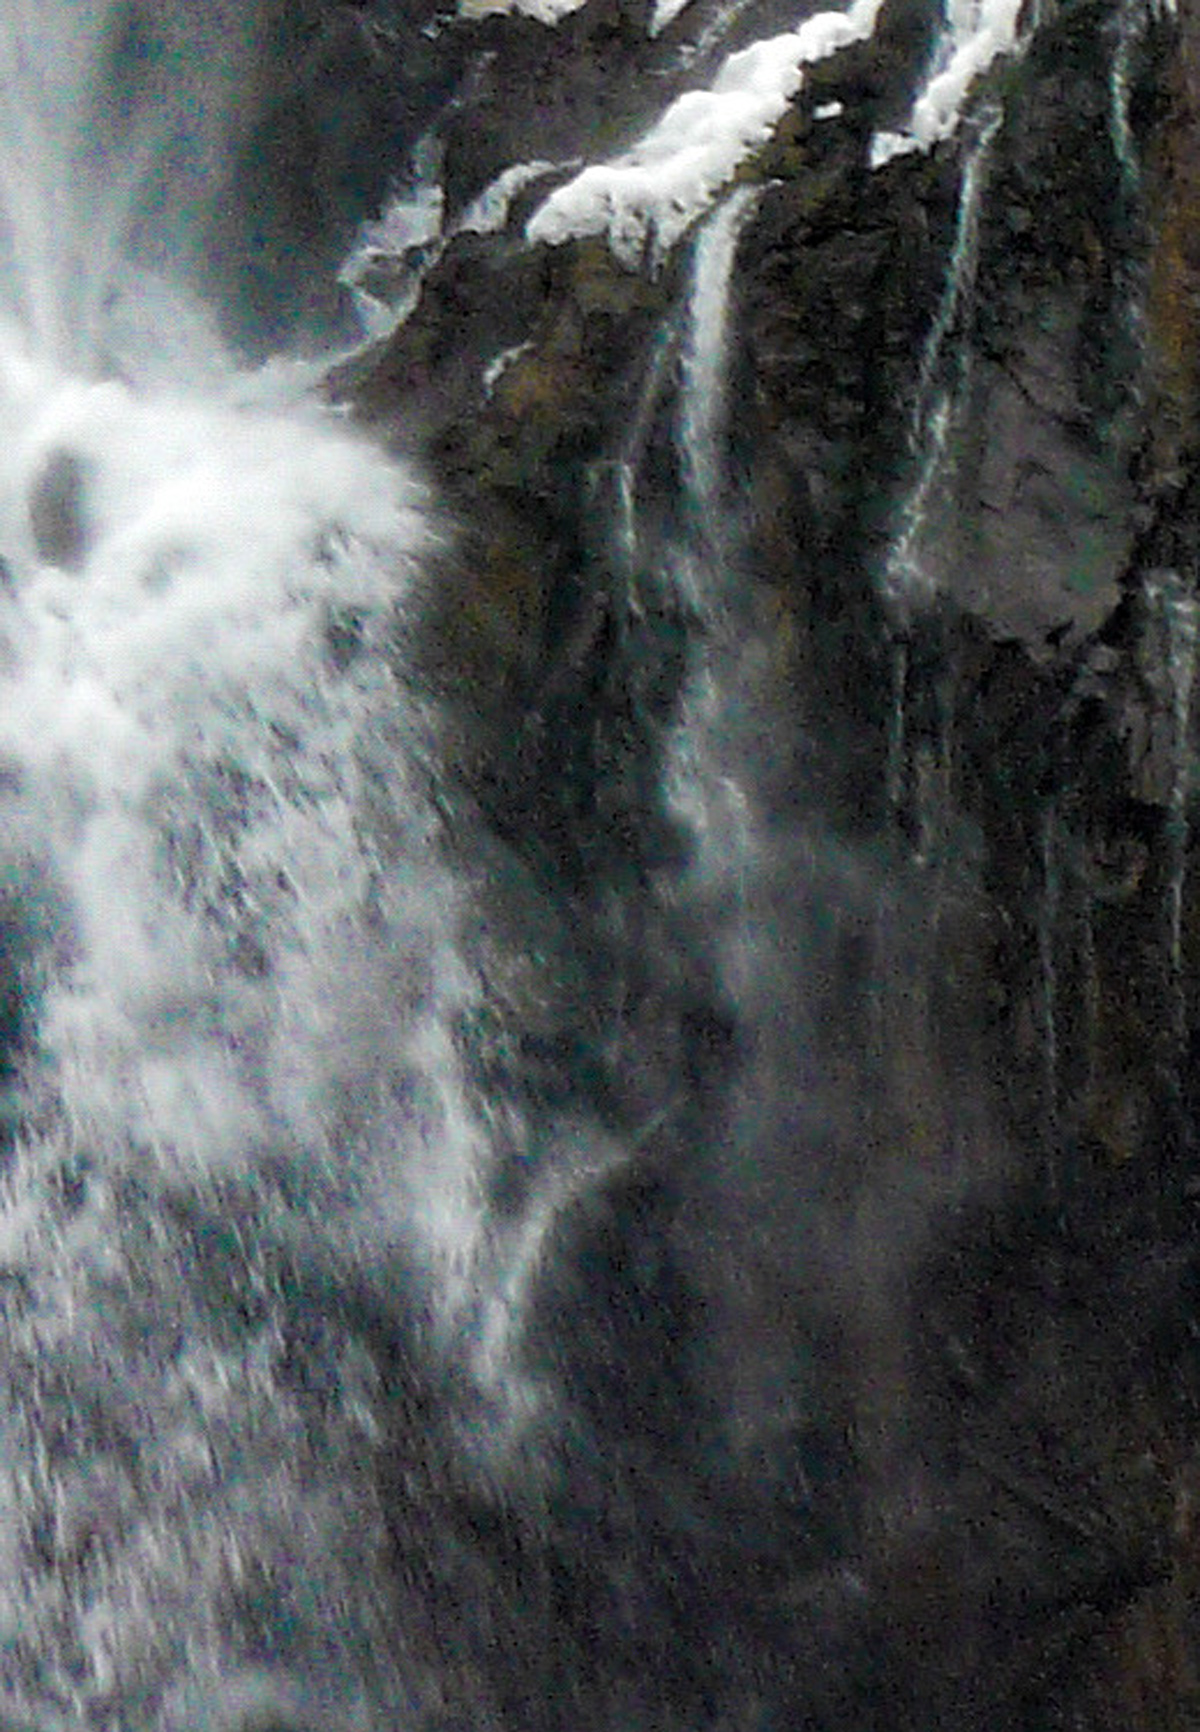 japan Landscape Nikko the sublime water waterfall